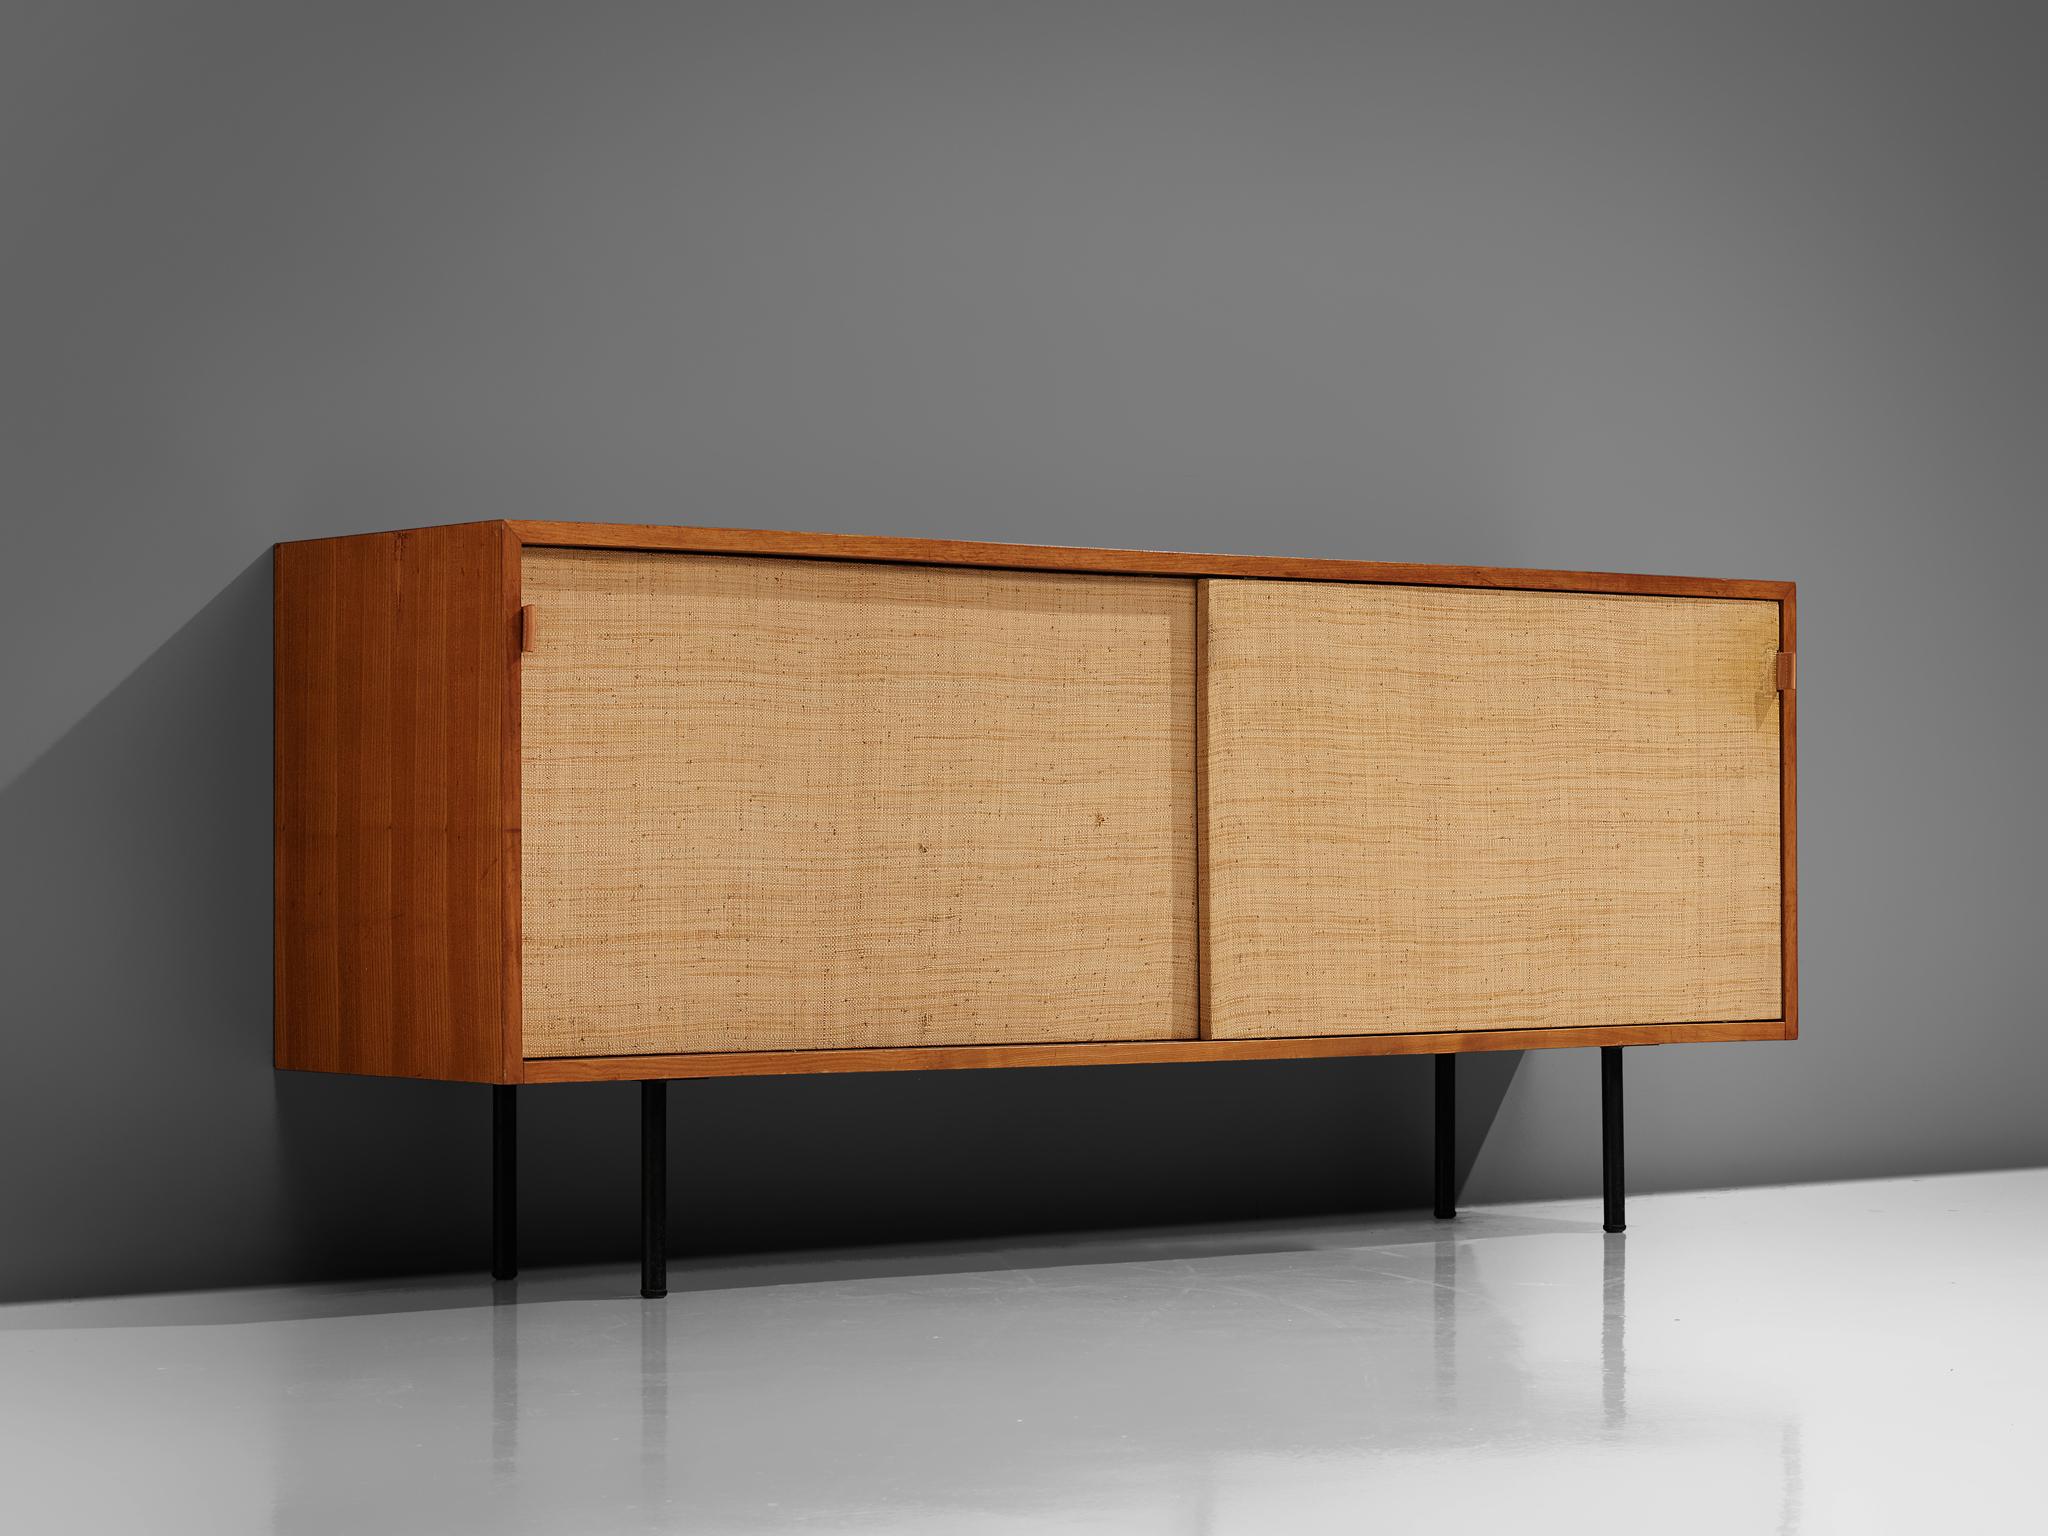 Florence Knoll for Knoll International, sideboard, walnut, seagrass, cane, steel and leather, United States, 1948.

An early office-residential crossover piece. The wooden sideboard has two sliding doors which are covered with cane. Inside there